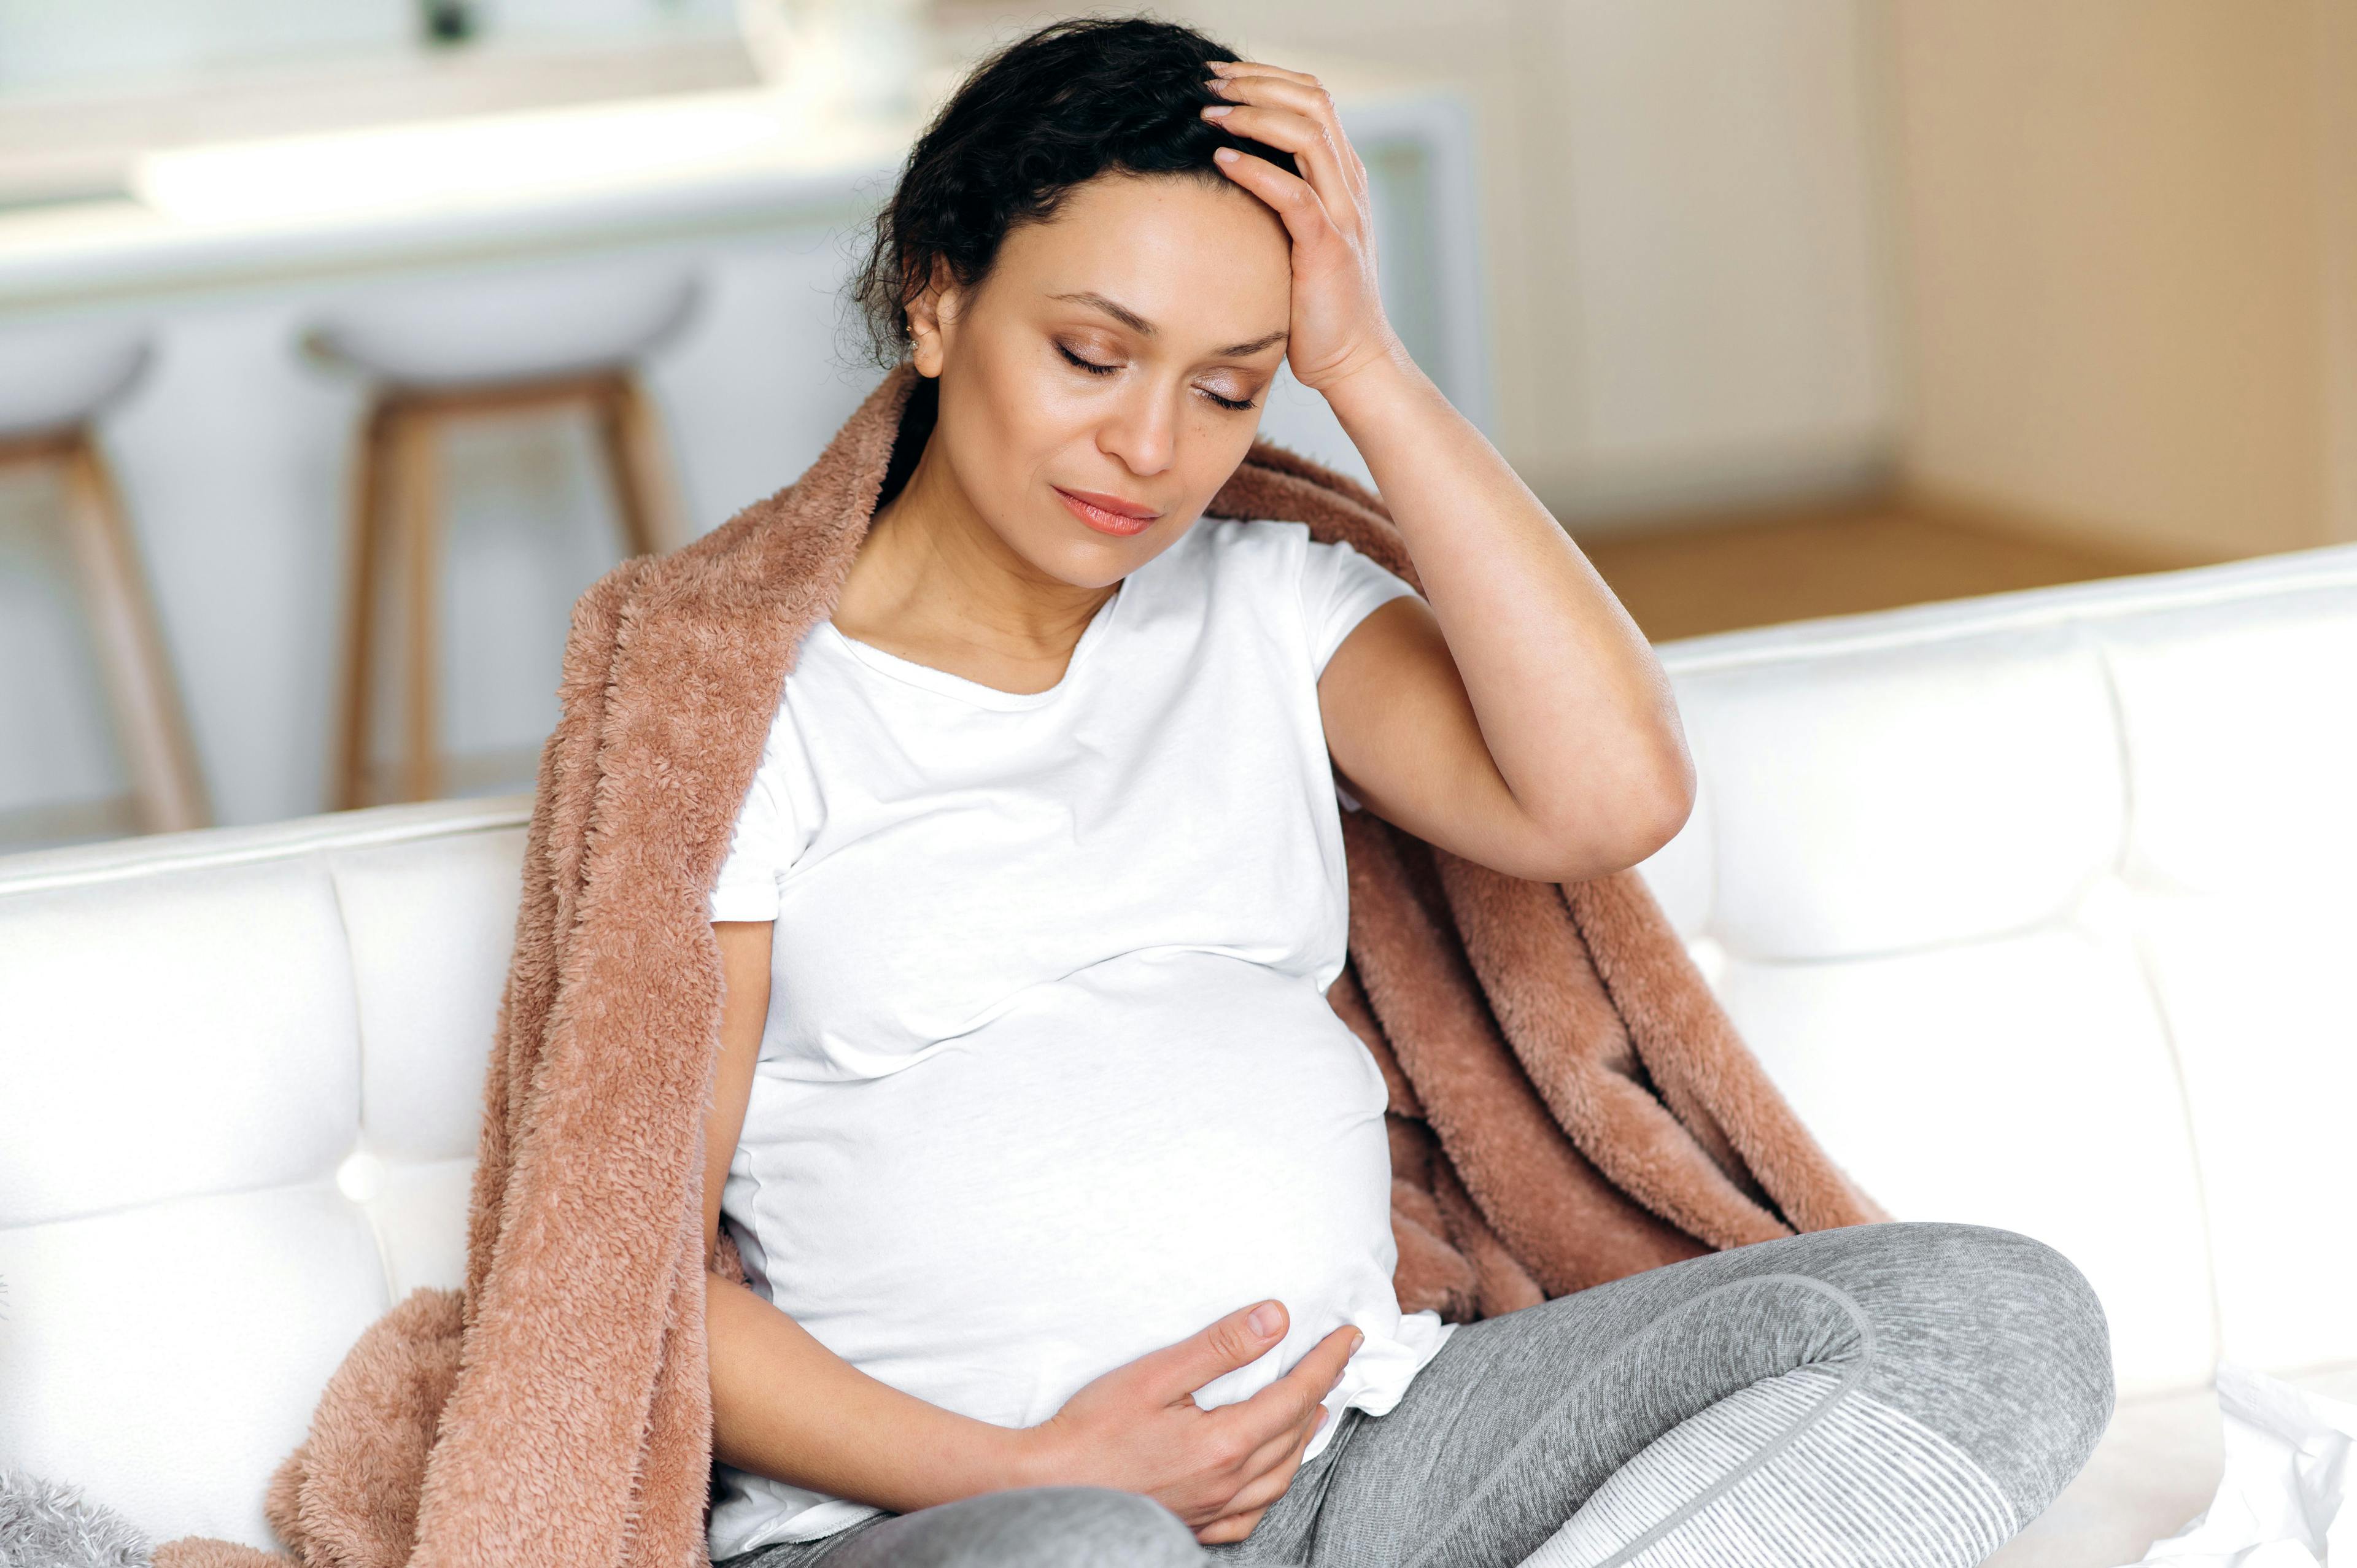 Prolonged stress and anxiety during pregnancy disruptive to fetal brain development